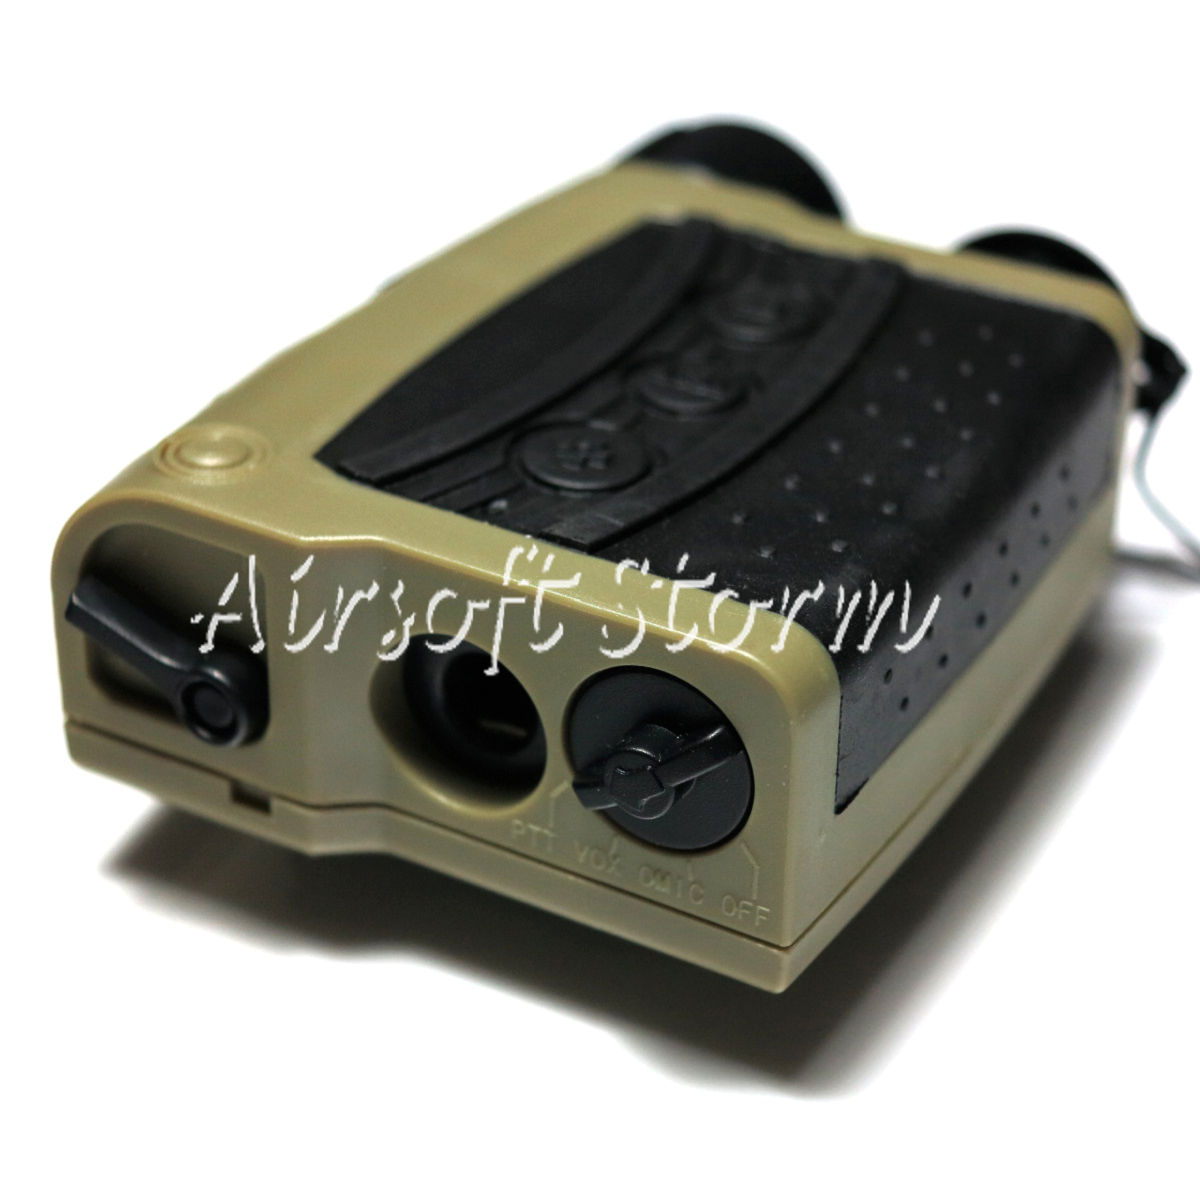 Airsoft SWAT Communications Gear Z Tactical ZQUIET PRO PTT & Wire for ICOM 2-pin Radio